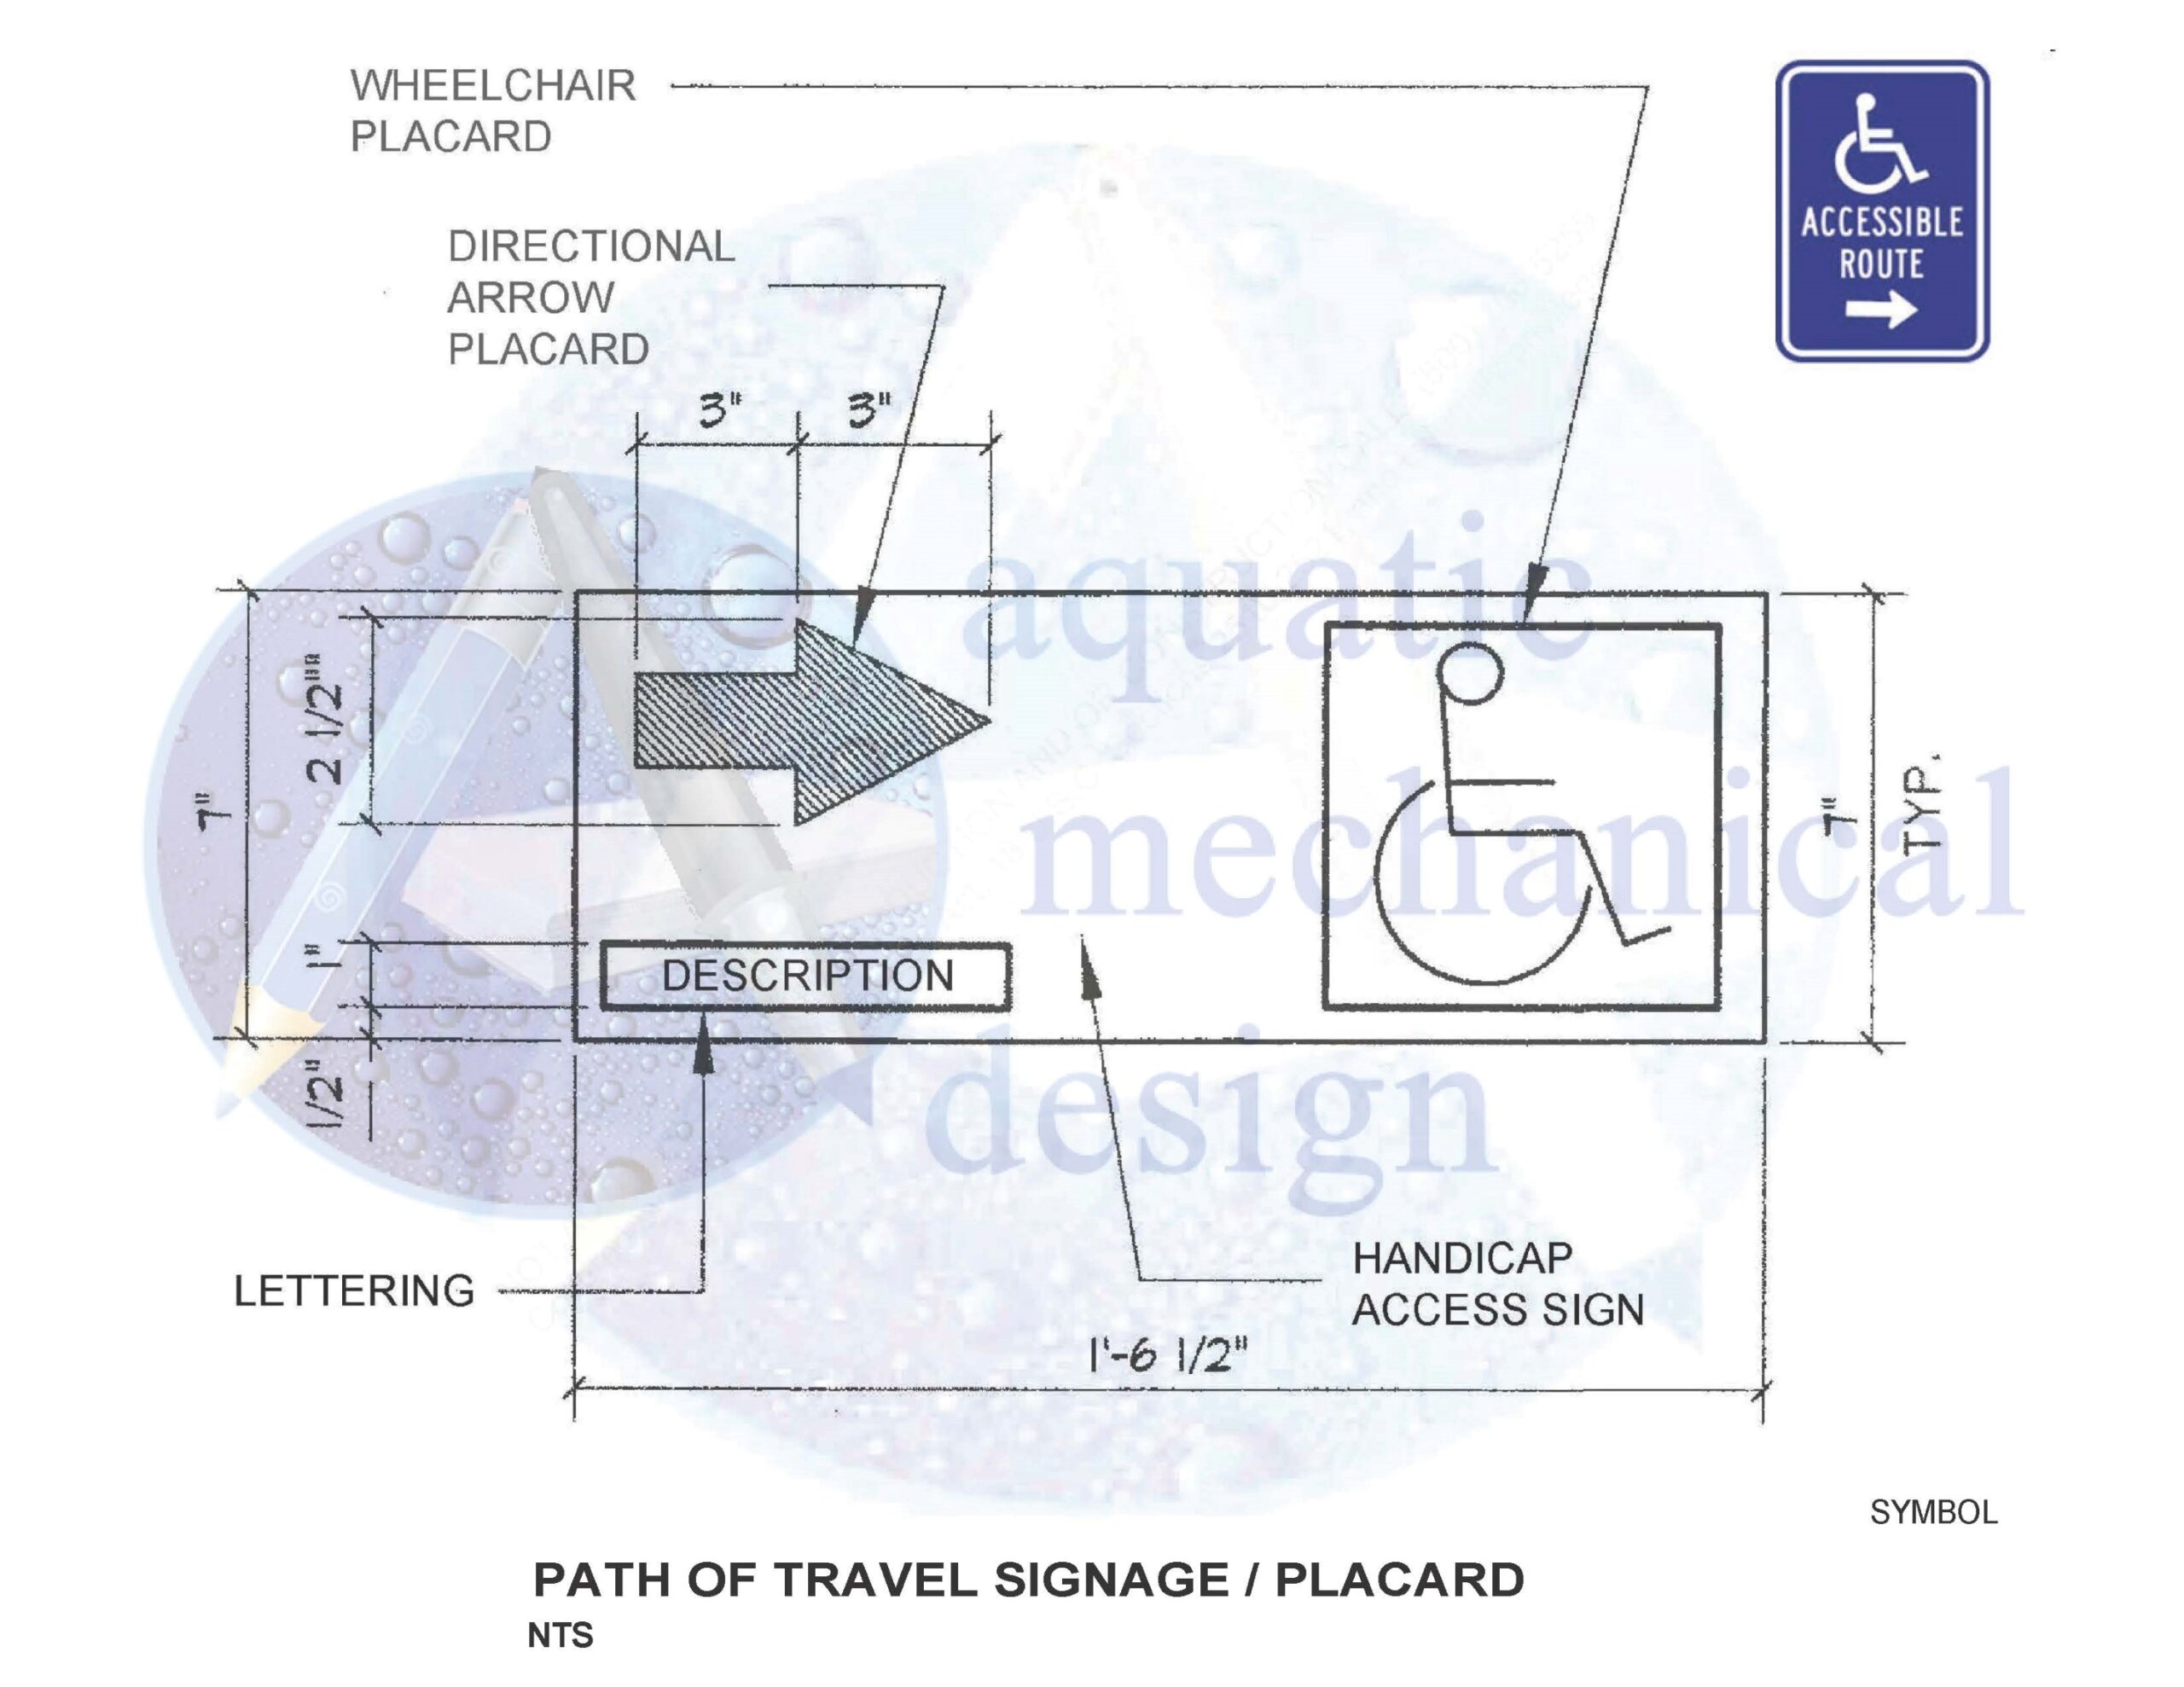 PATH OF TRAVEL SIGNAGE / PLACARDS